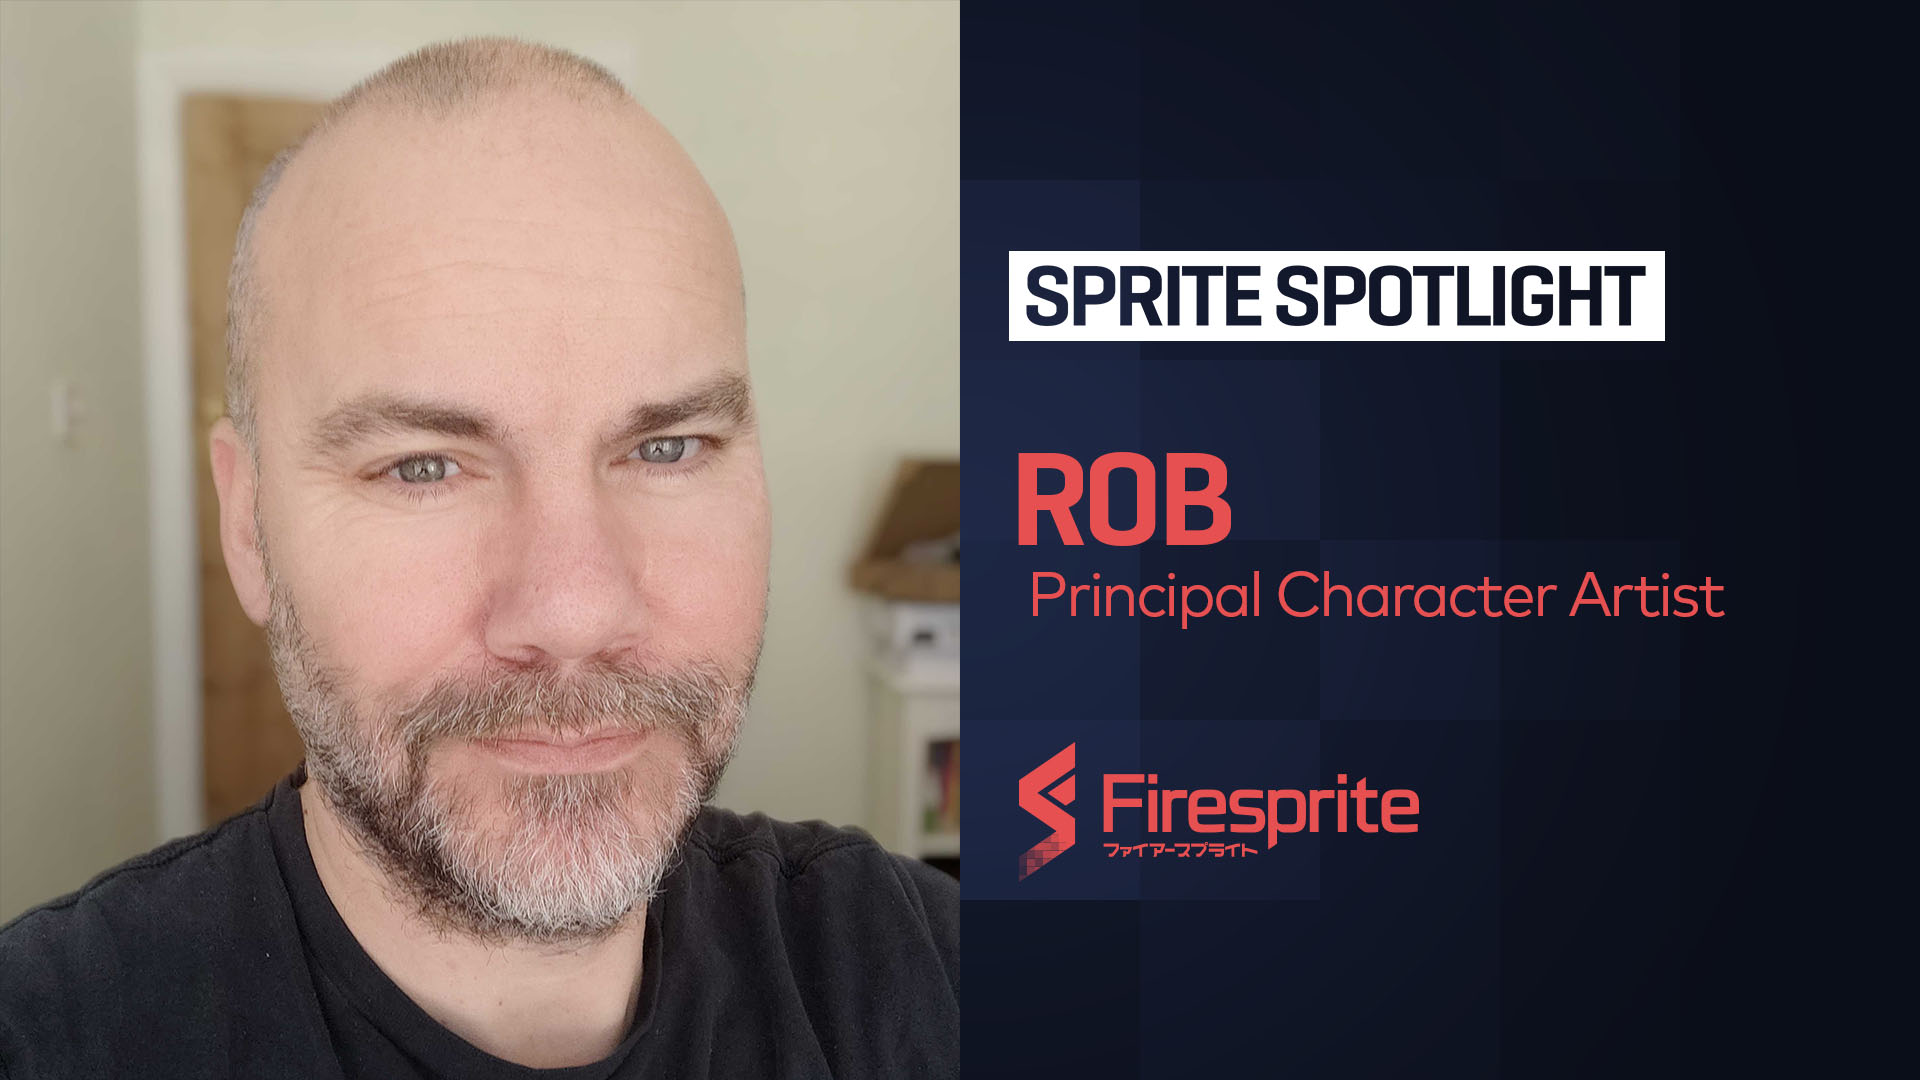 Person smiling at camera for portrait photo to discuss games industry topics and their role in video games. Today’s ‘sprite spotlight’ is Rob who is a Principal Character Artist at Firesprite. Rob’s photos sits left of a blue pixel backdrop which displays name, role and the Firesprite logo in red.  